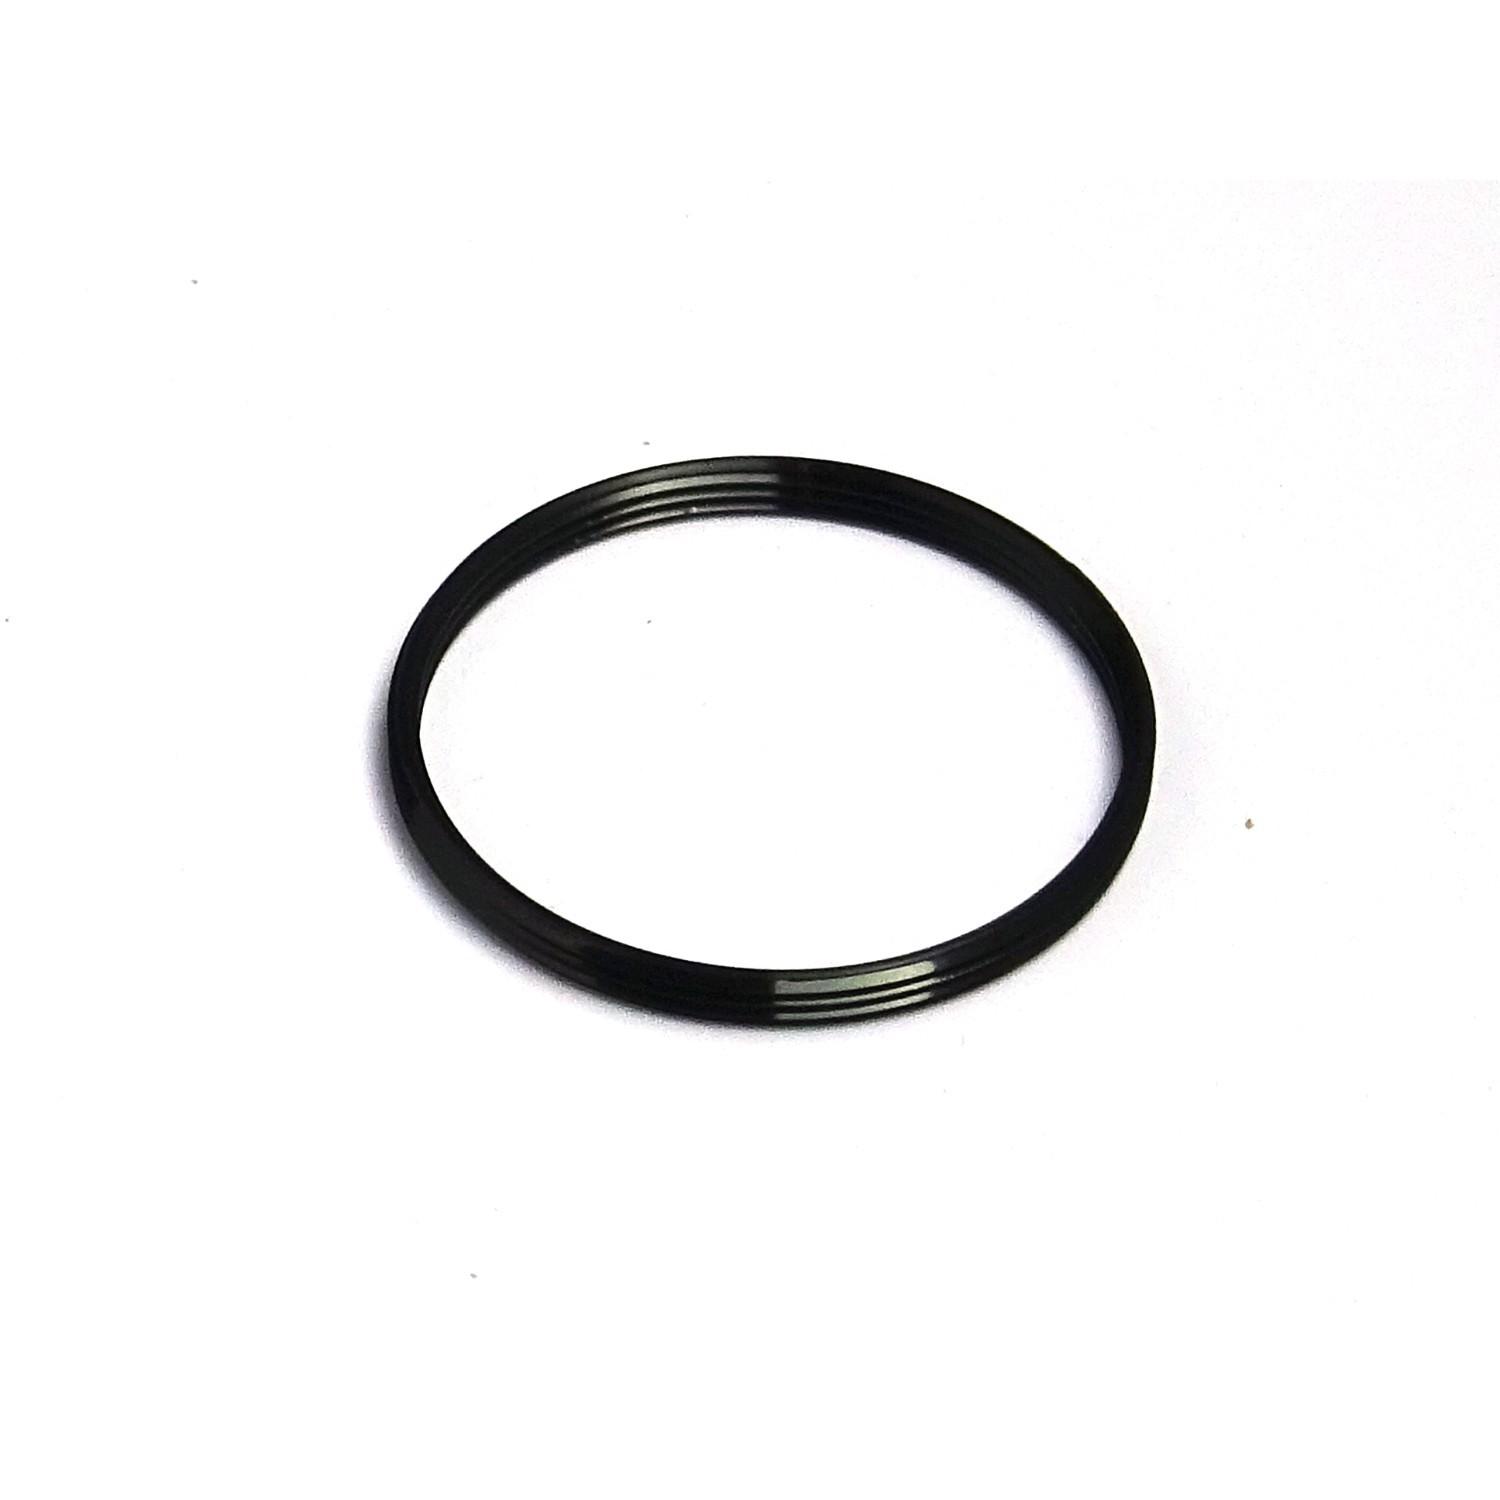 M39 to M42 Screw Lens Mount Adapter Step Up Ring For Pentax M39-M42 - UK Seller